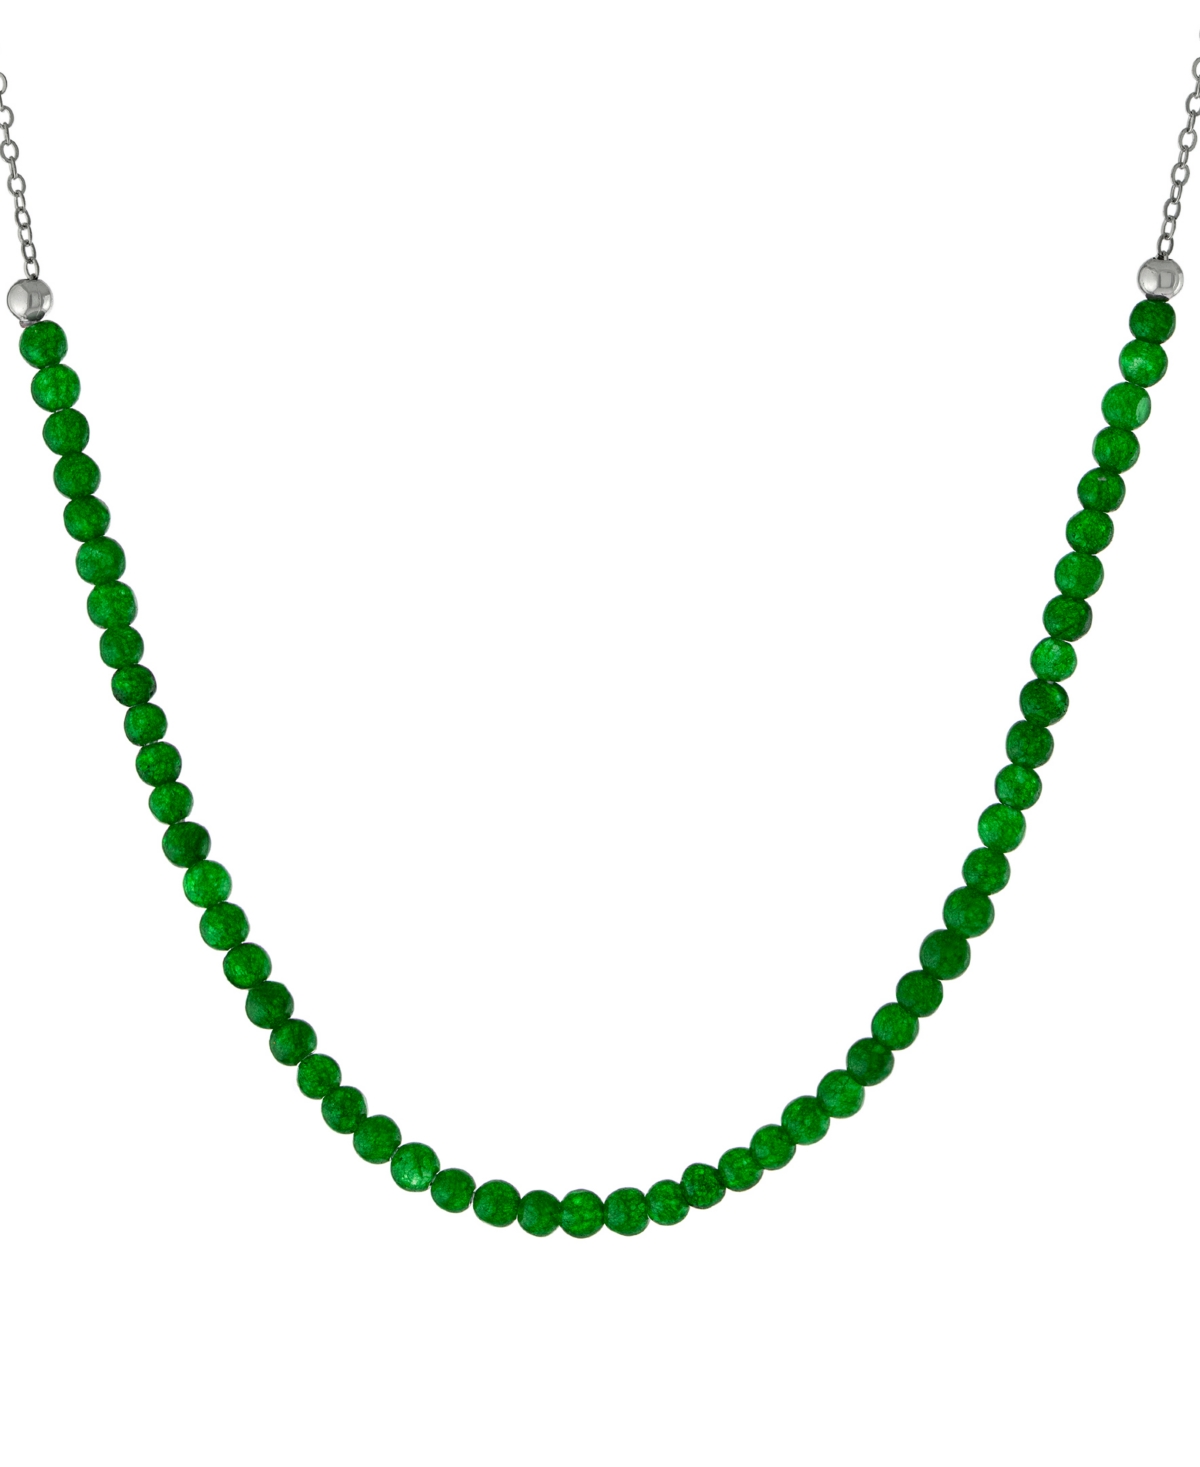 Giani Bernini Green Agate Beaded Collar Necklace In Sterling Silver, 16" + 2" Extender, (also In Rose Quartz, Jasp